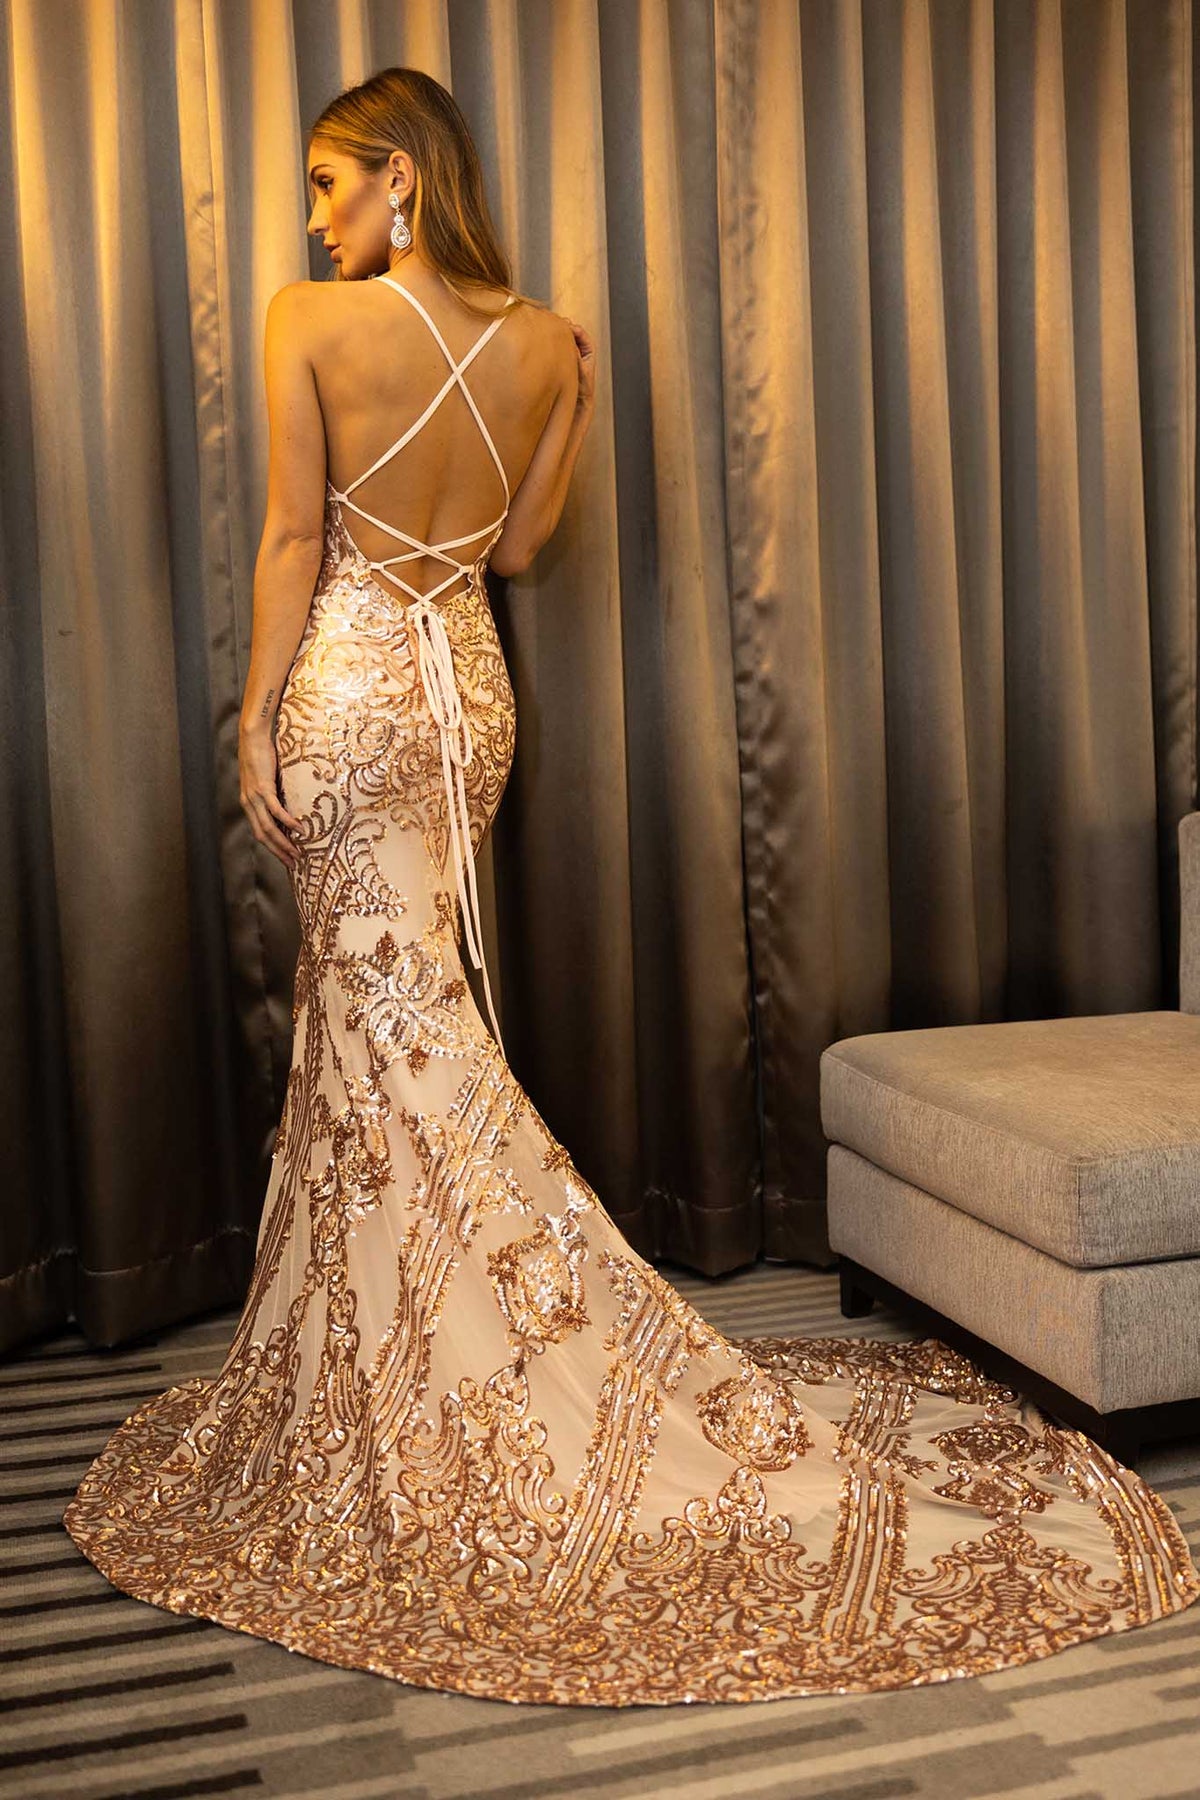 Rose Gold Embroidered Pattern Sequin with Light Pink Lining Floor Length Evening Gown with V Neckline, Lace Up Open Back, Fit & Flare Mermaid Skirt and Floor Sweeping Train